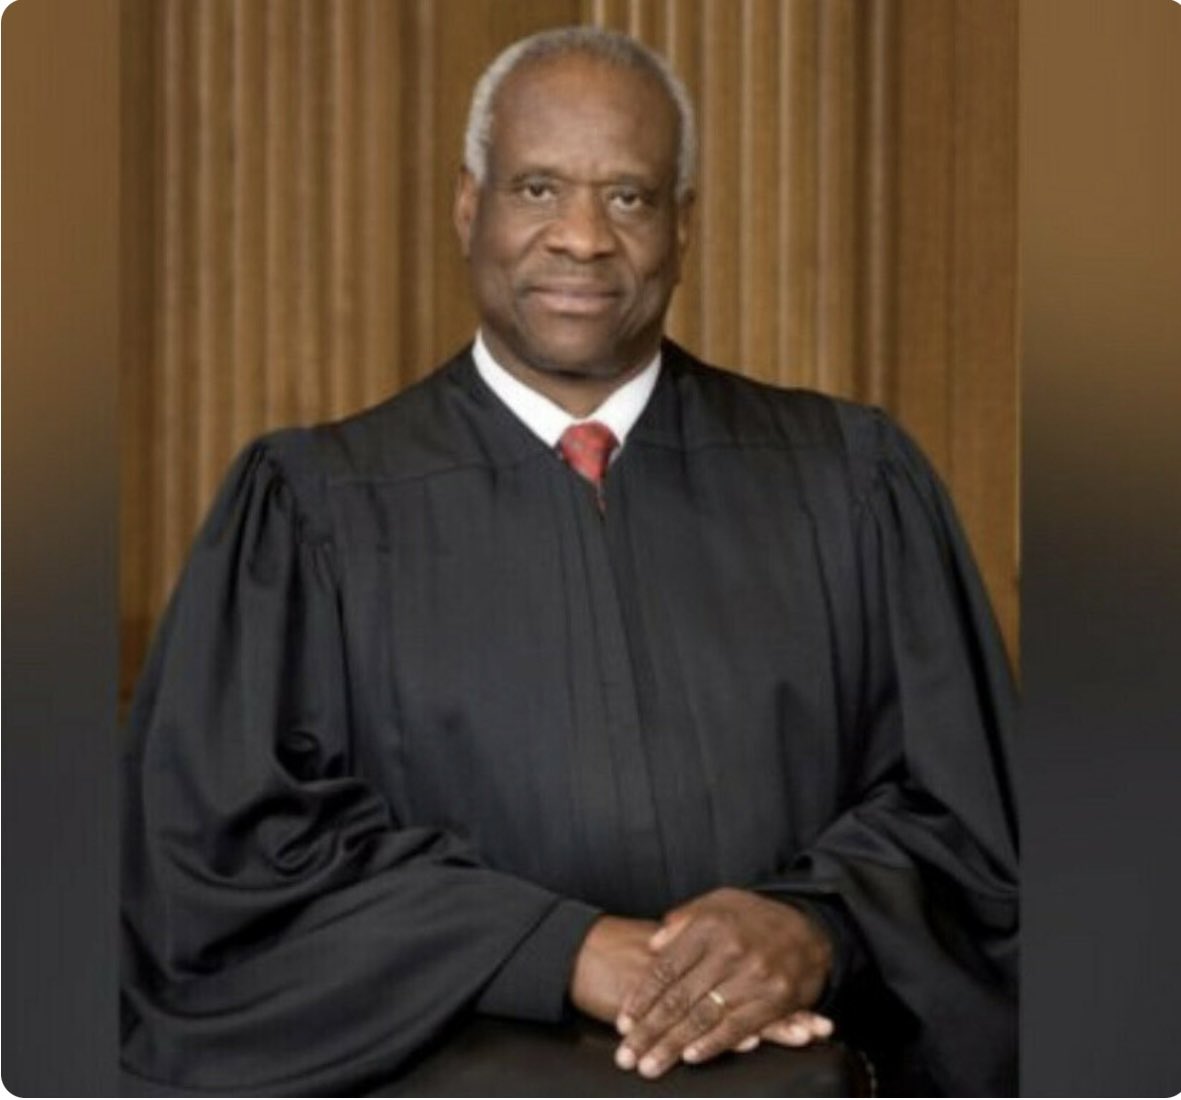 Retweet if you think SCOTUS Justice Clarence Thomas, is the Best Justice on the Supreme Court..